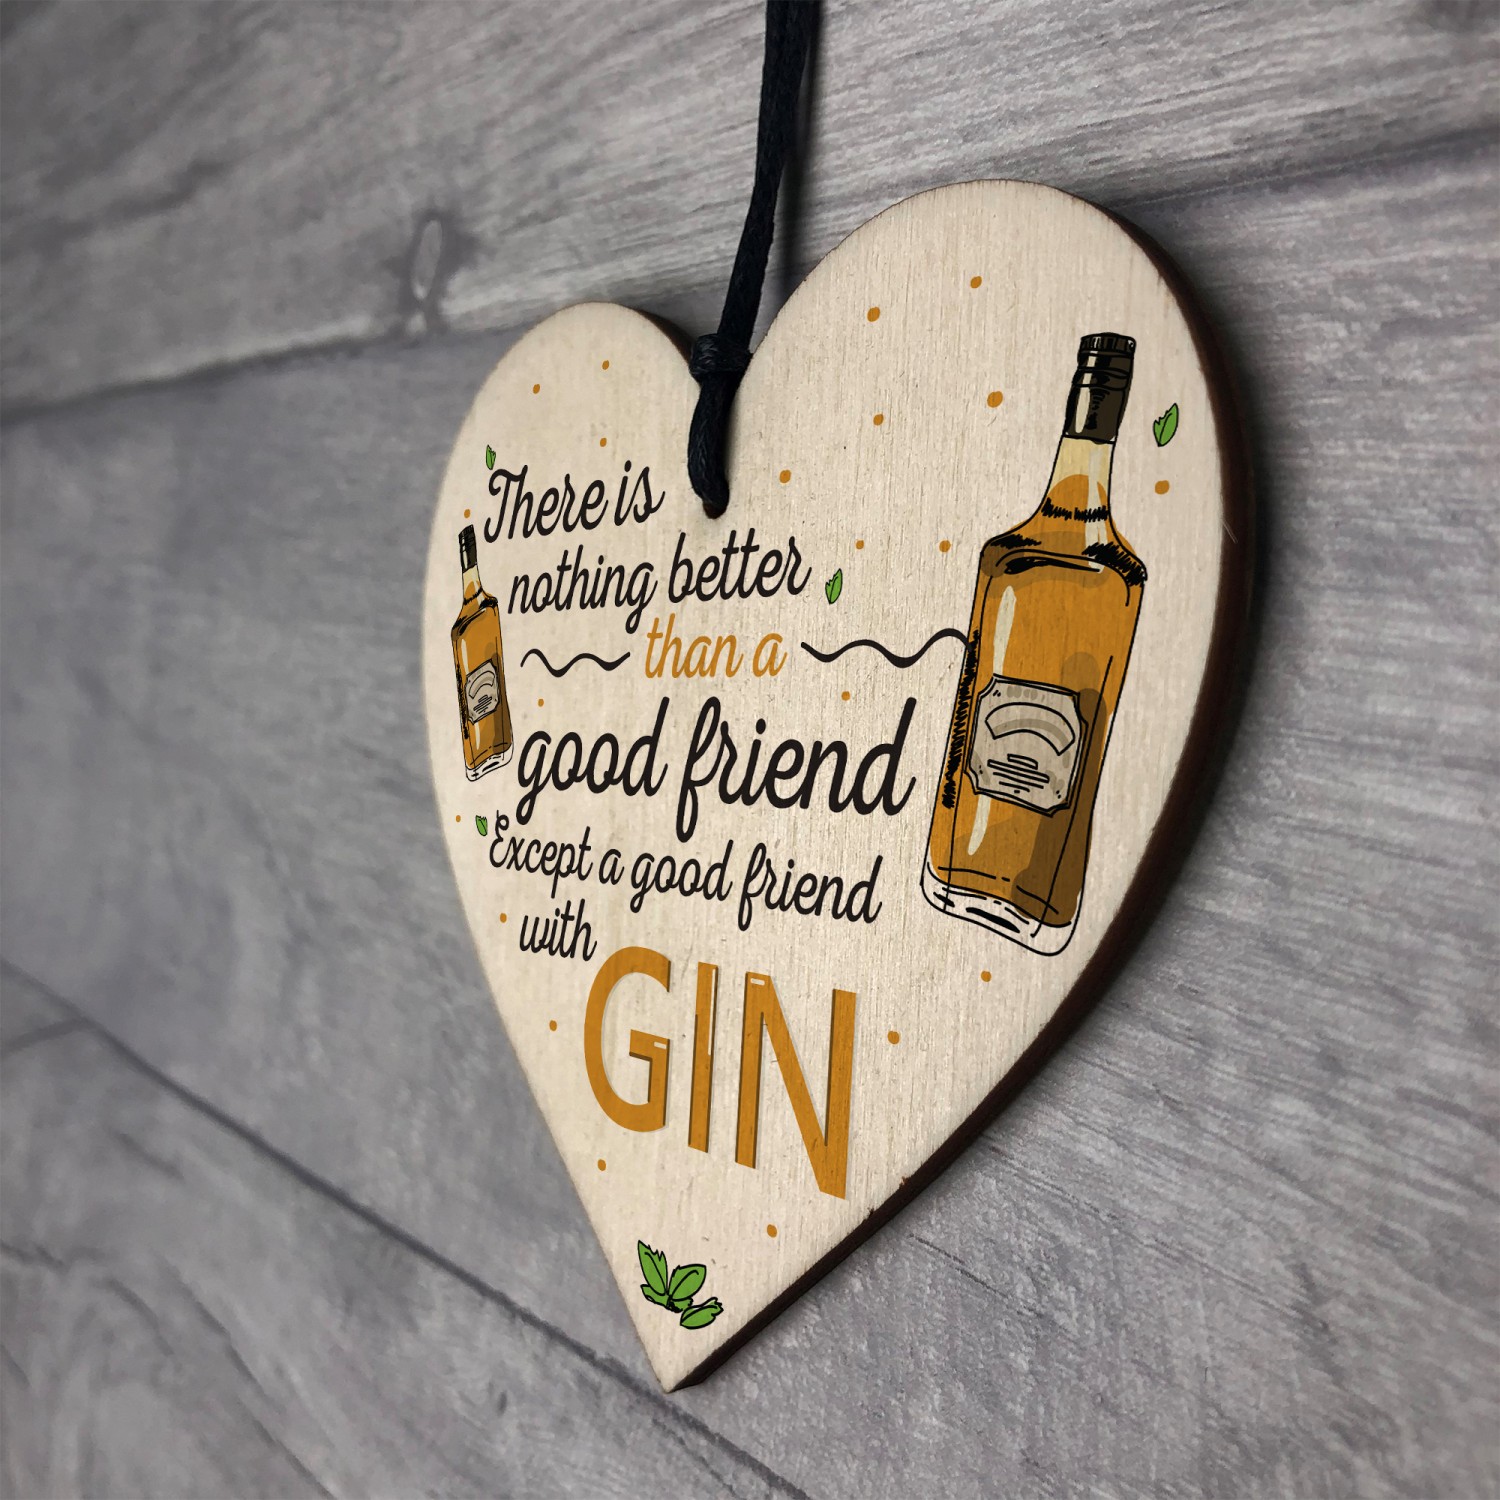 RED OCEAN Good Friend With Gin Novelty Wooden Hanging Heart Plaque Alcohol Joke Sign 